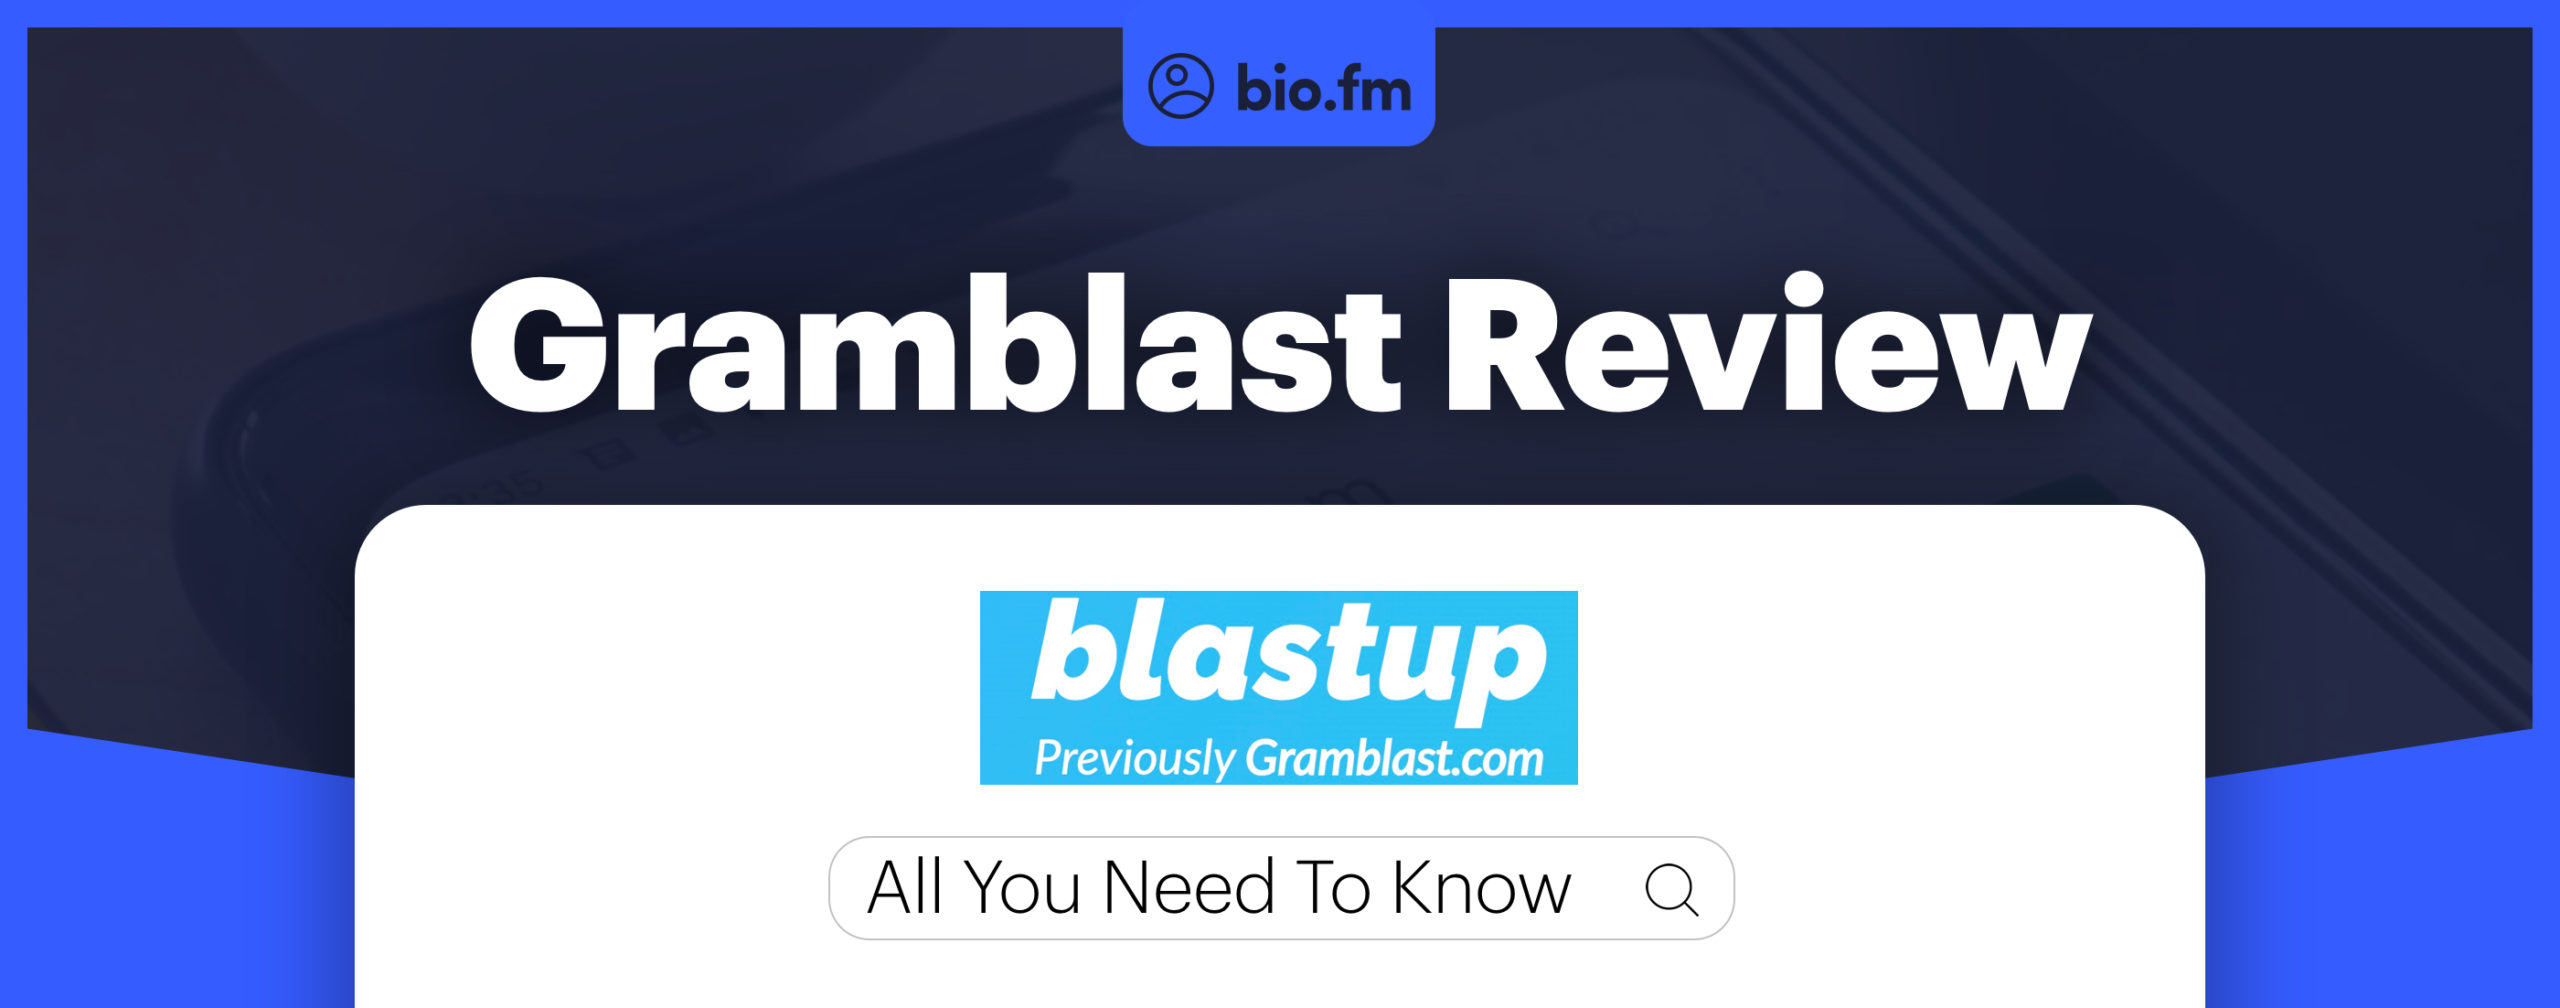 gramblast review featured image